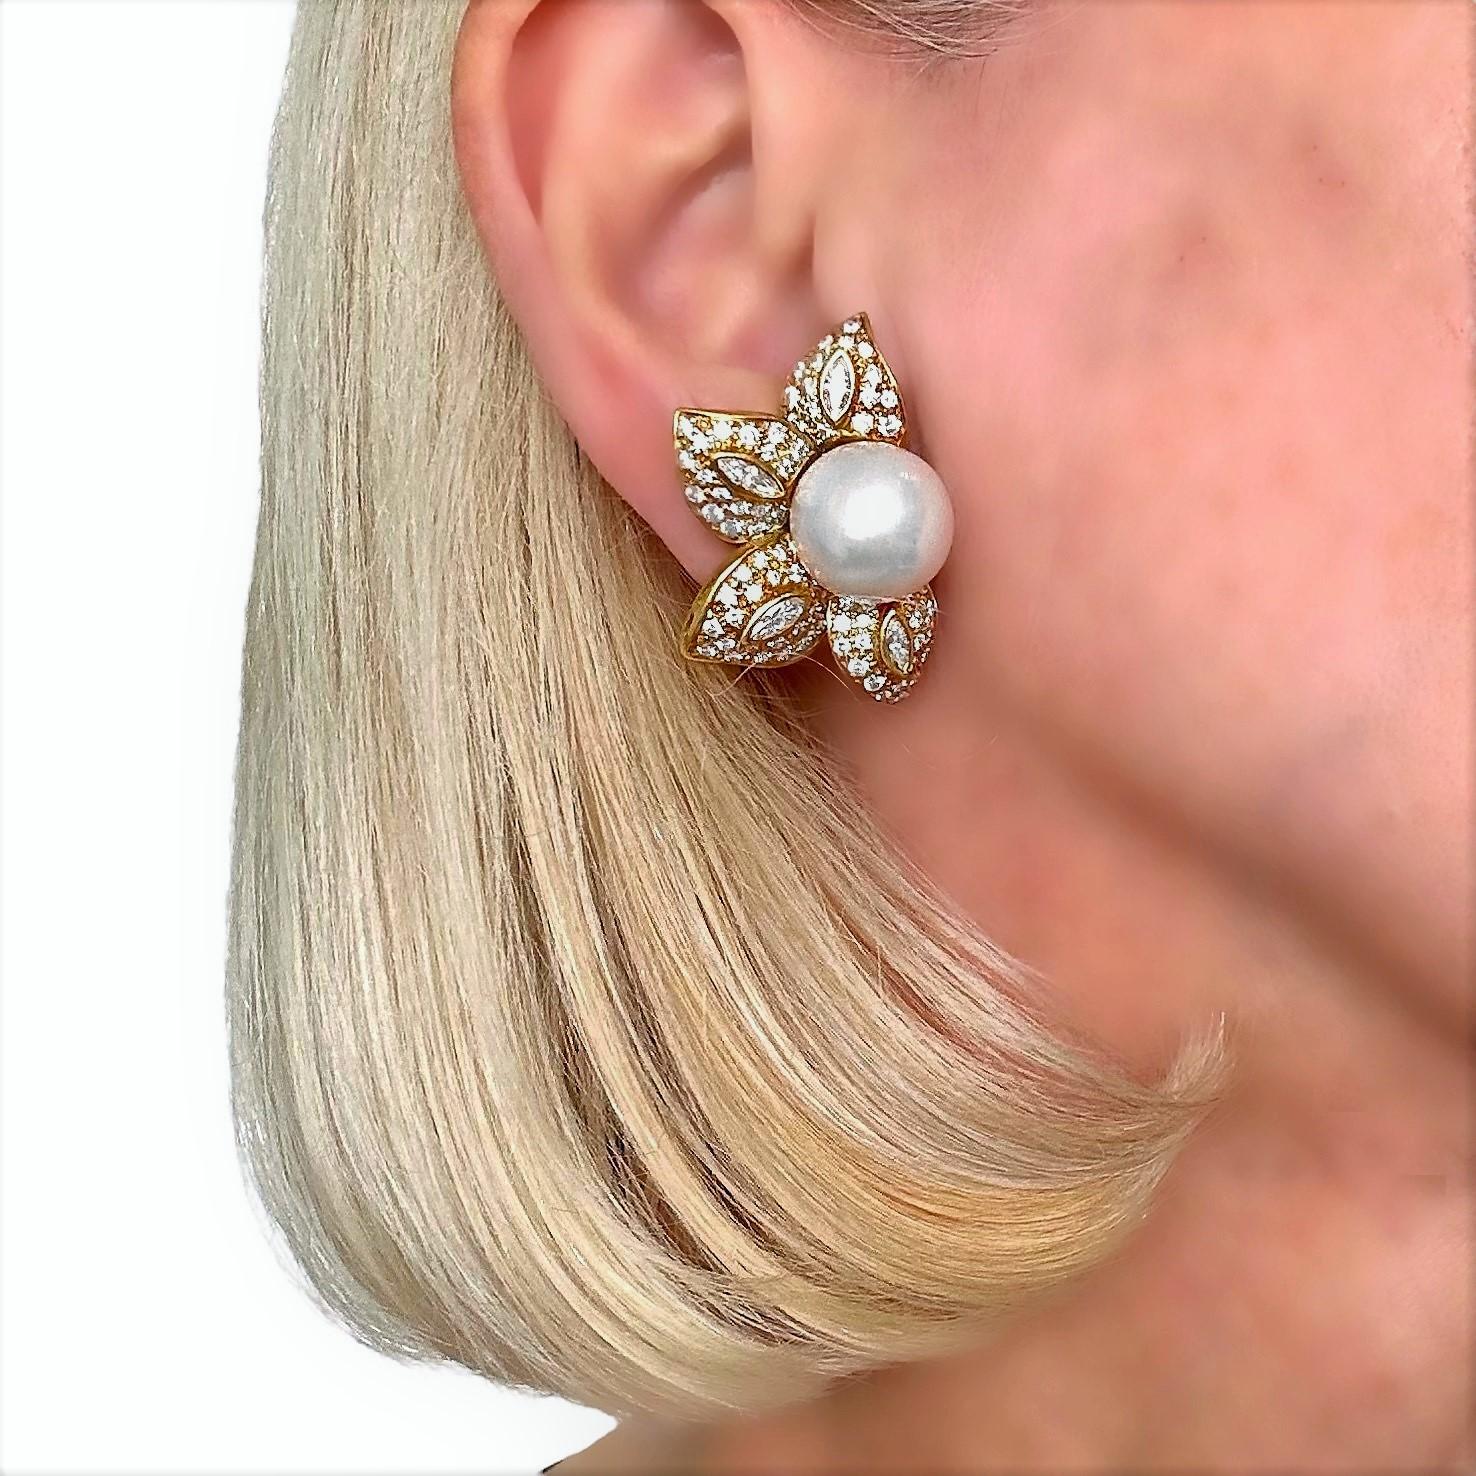 Feminine Vintage Earrings in 18k Yellow Gold, Diamonds, & South Sea Pearls In Good Condition For Sale In Palm Beach, FL